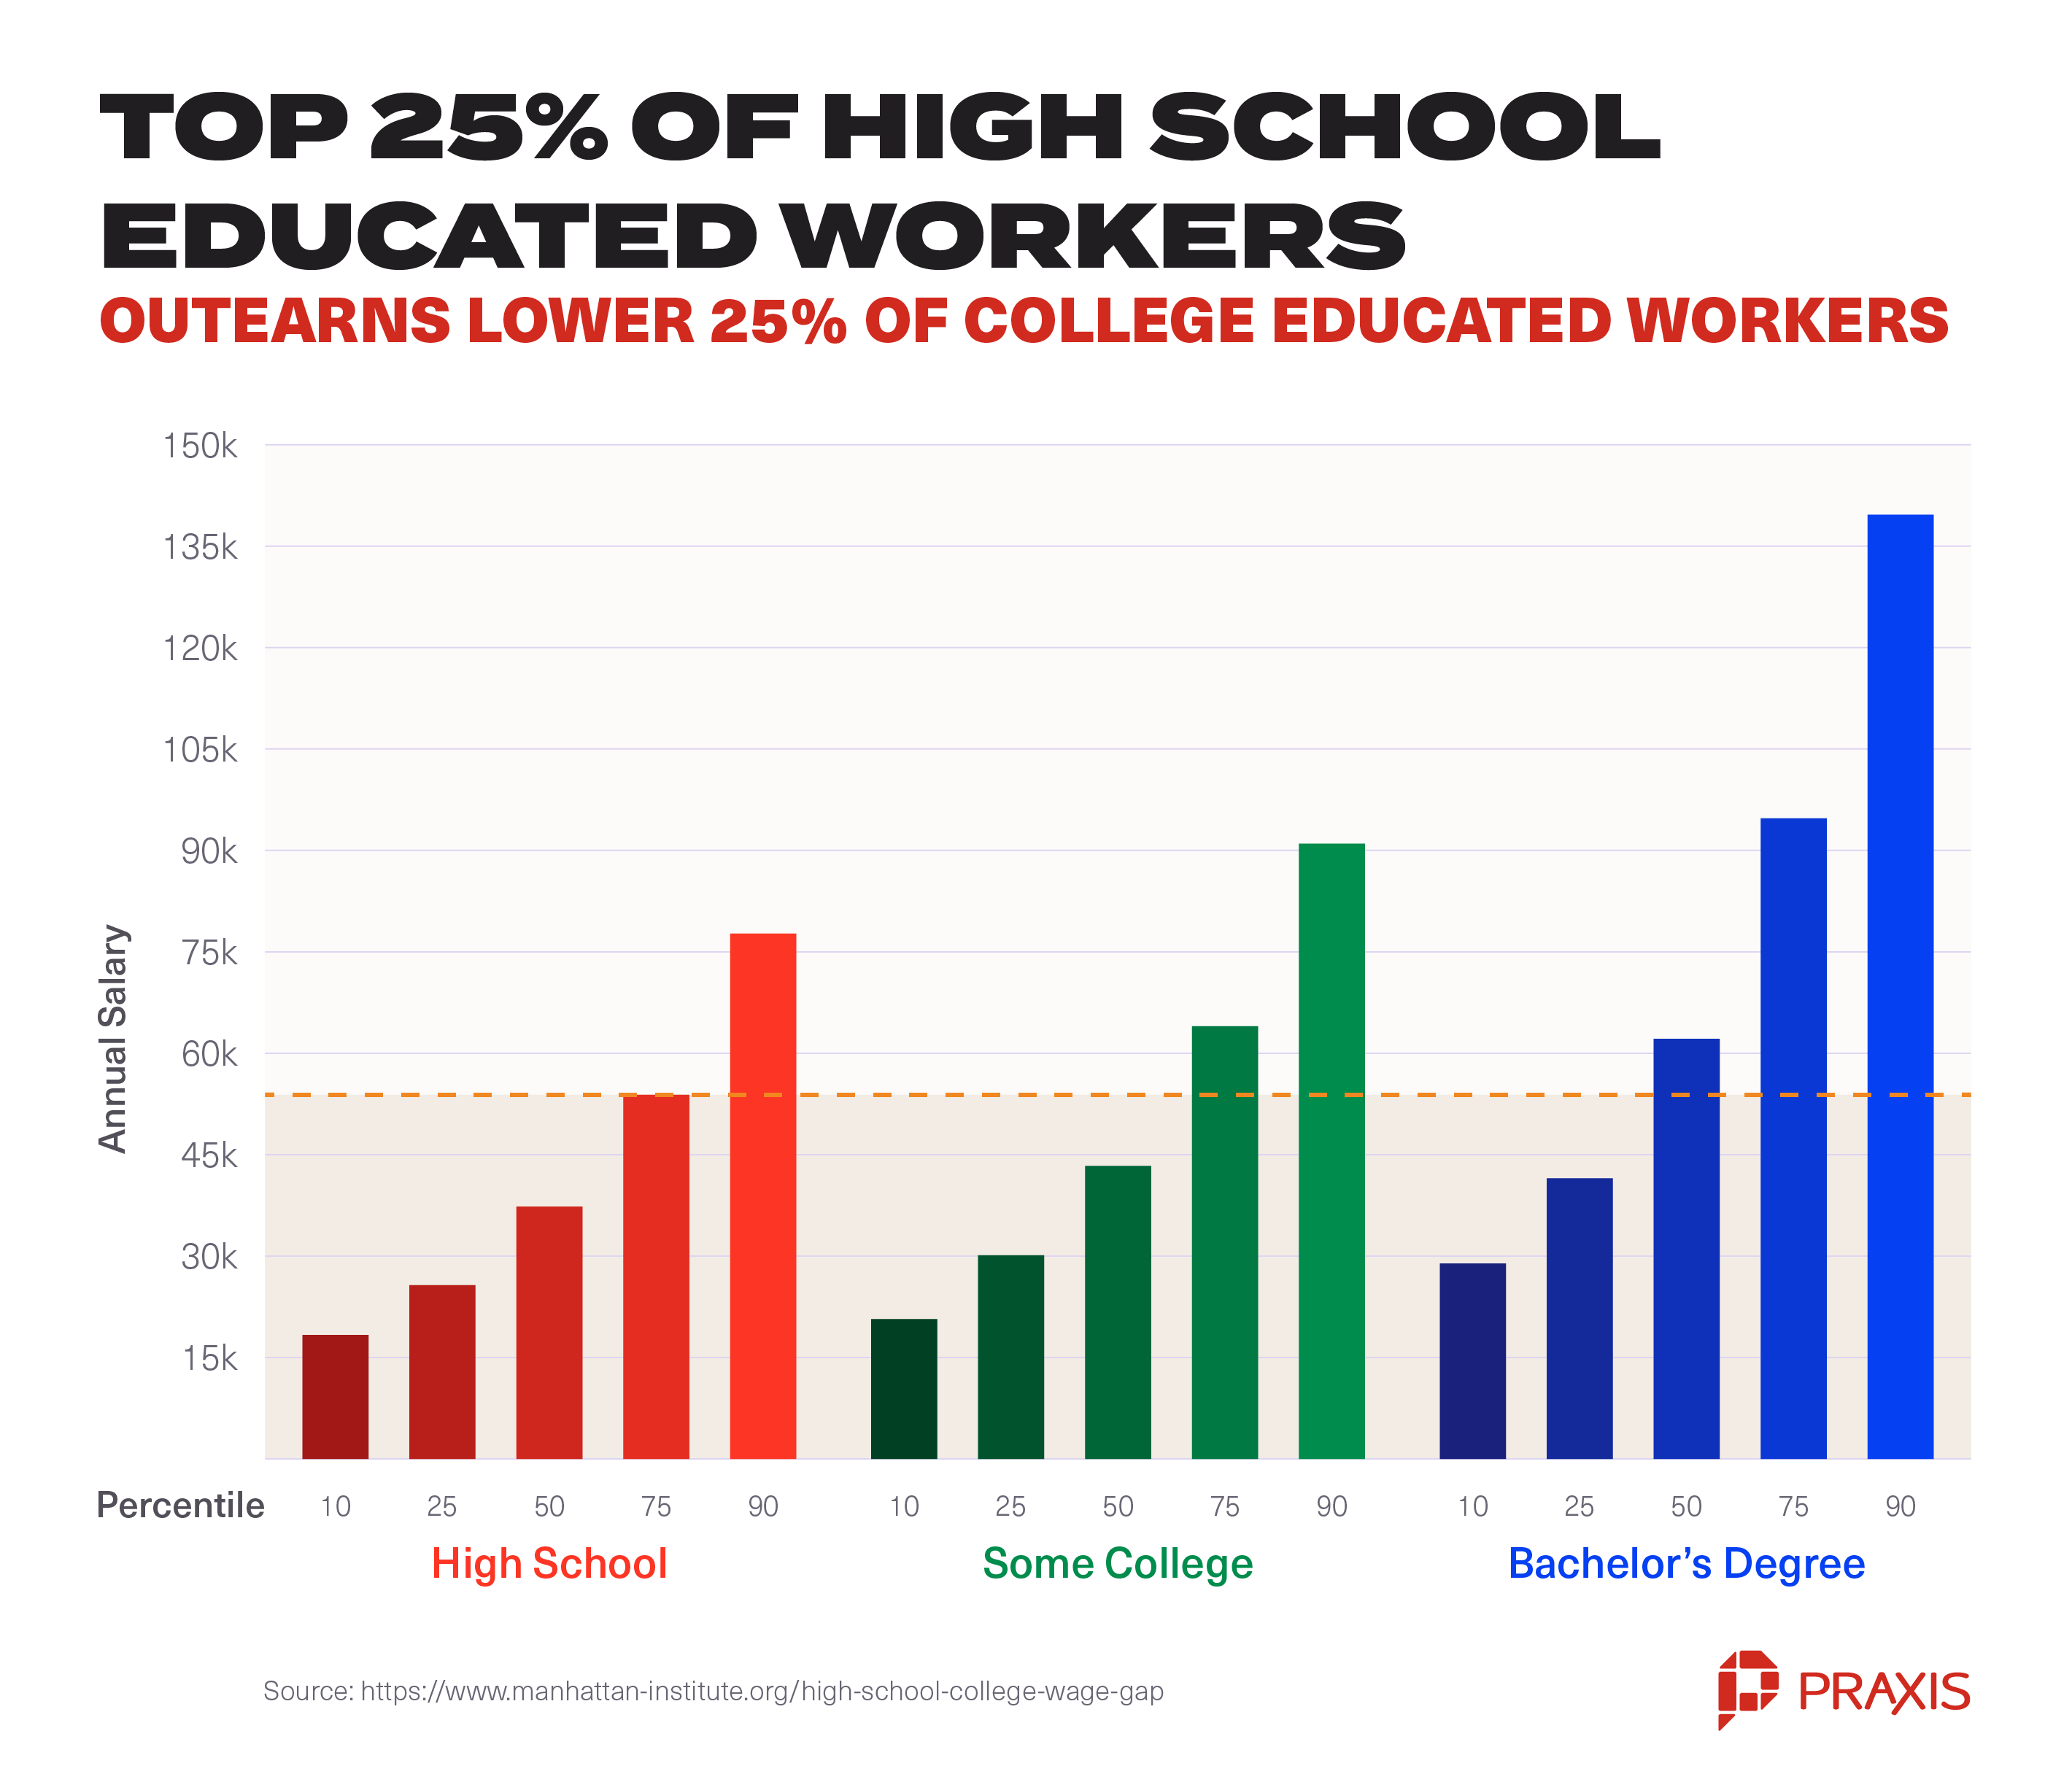 high school workers outearn college